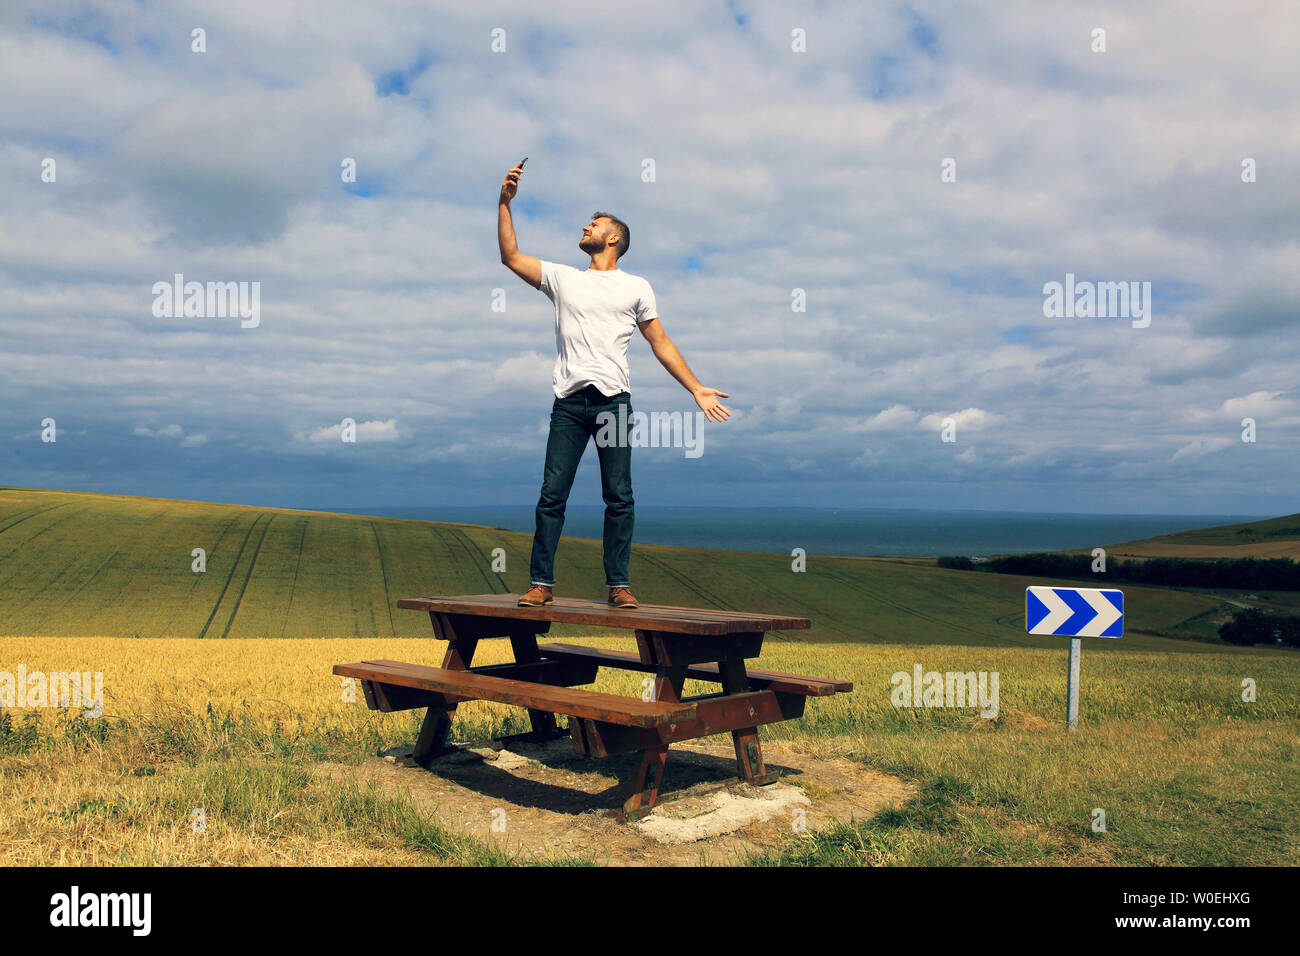 Man with phone standing on picnic table Stock Photo